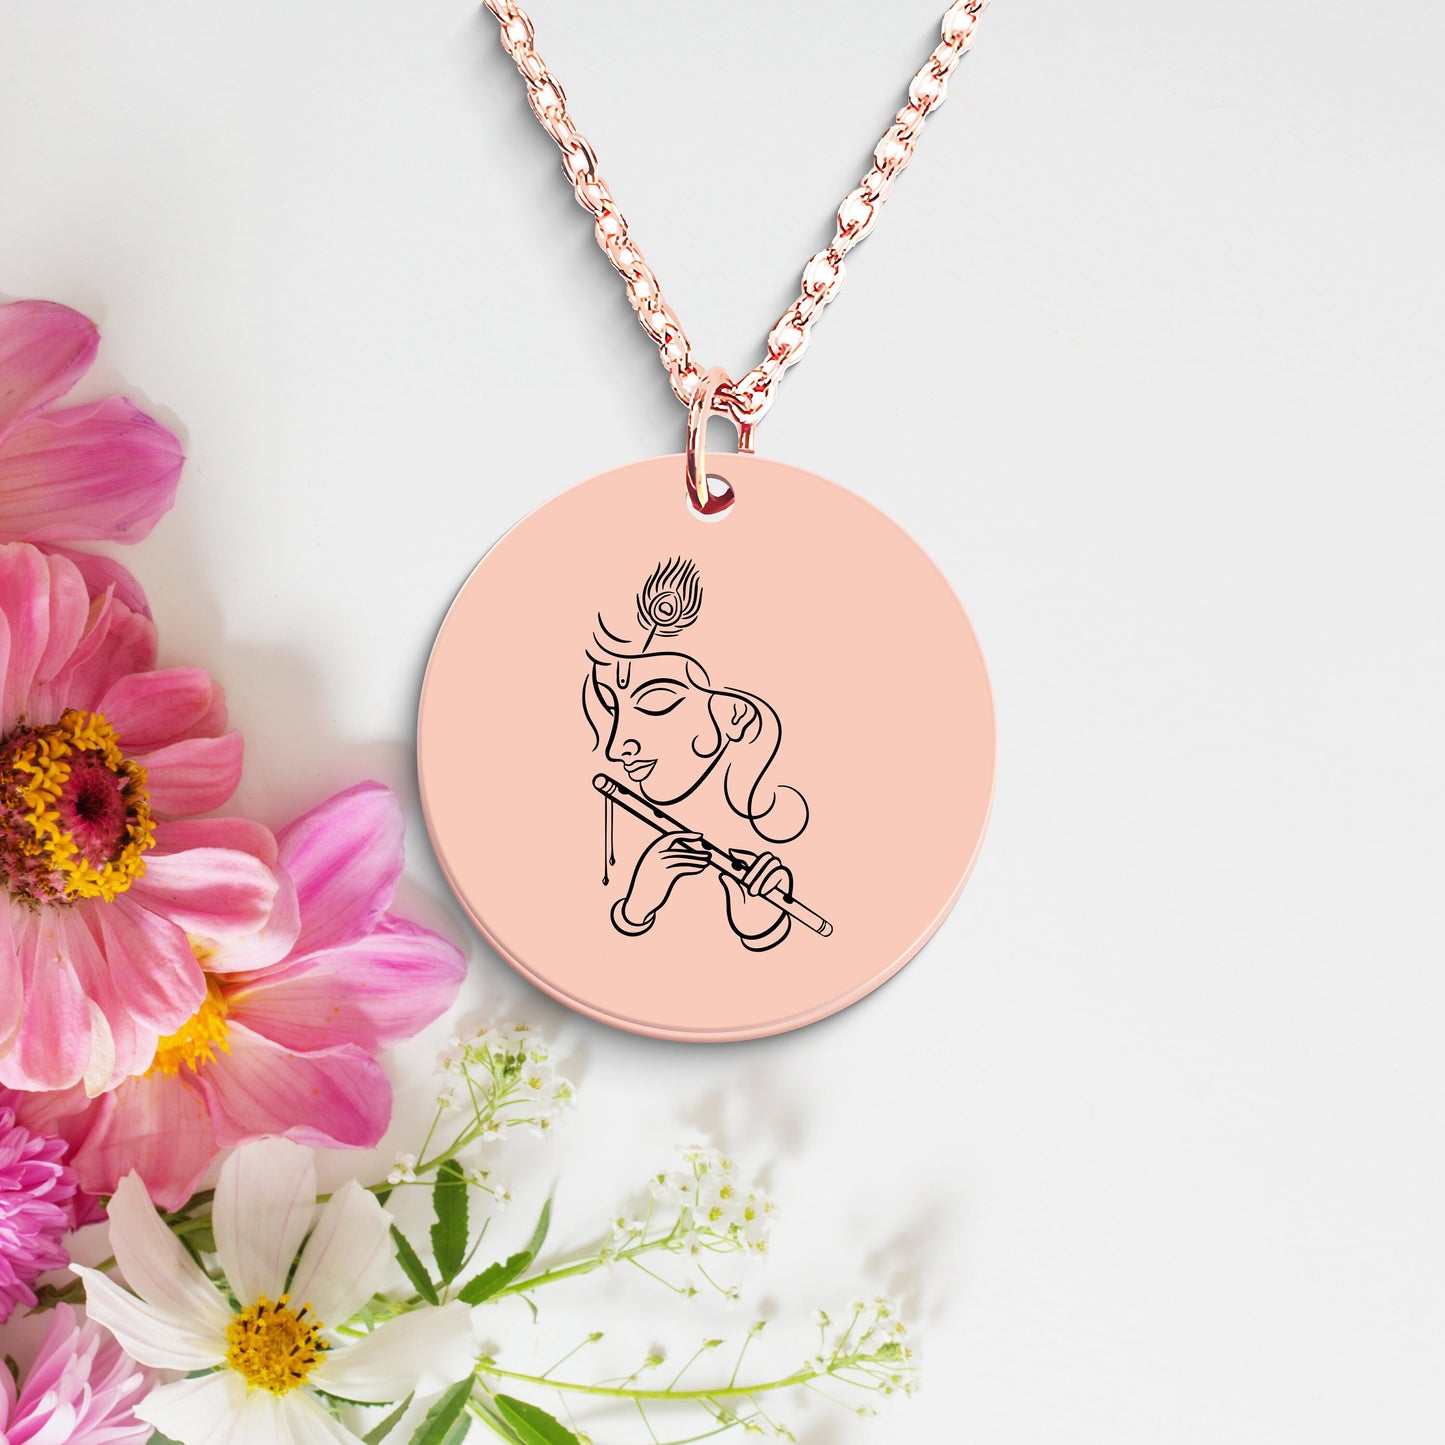 Hindu God Coin Necklace - Personalizable Gift